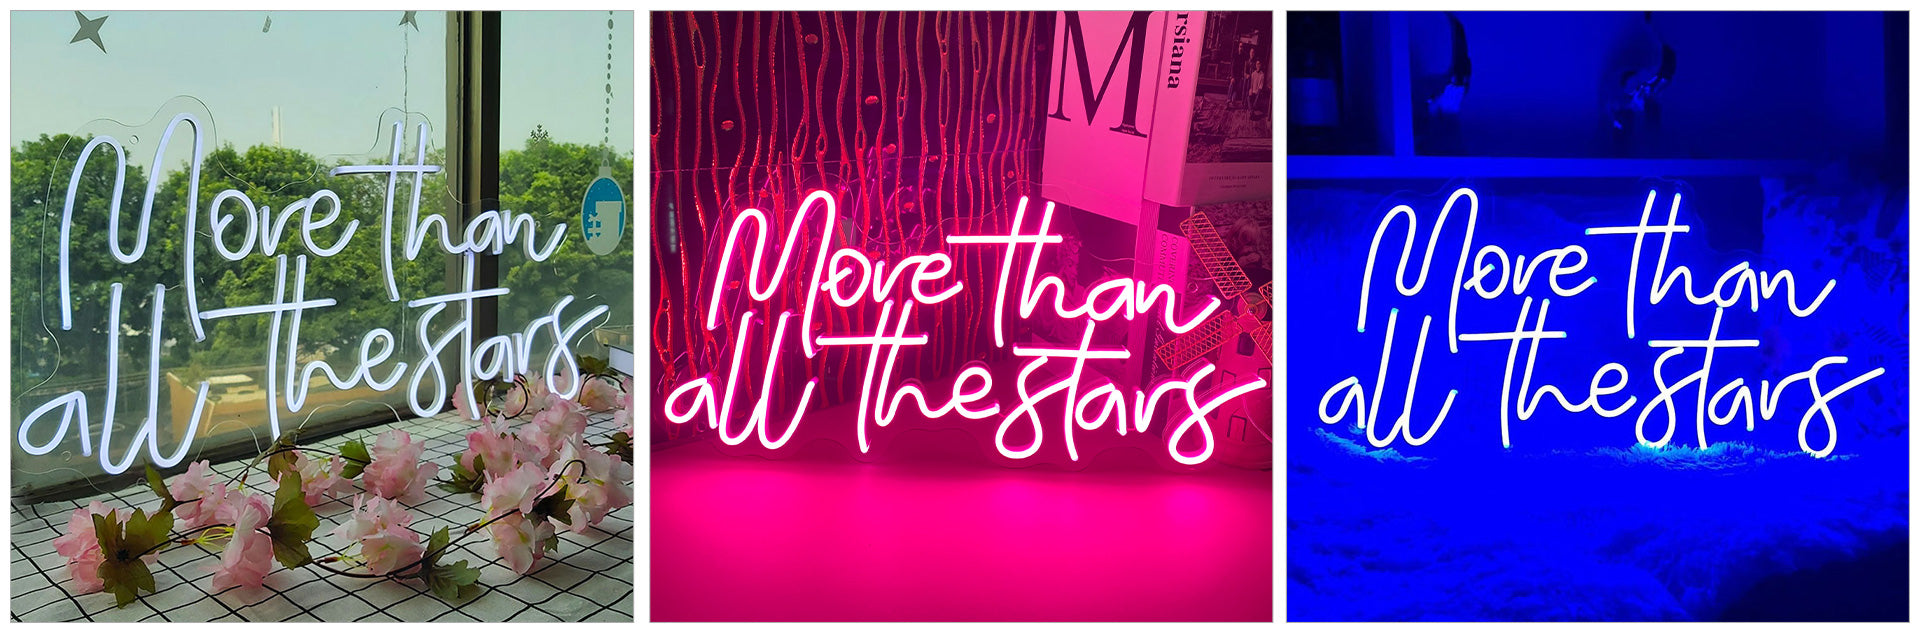 More than All The Stars Neon-NeonParty